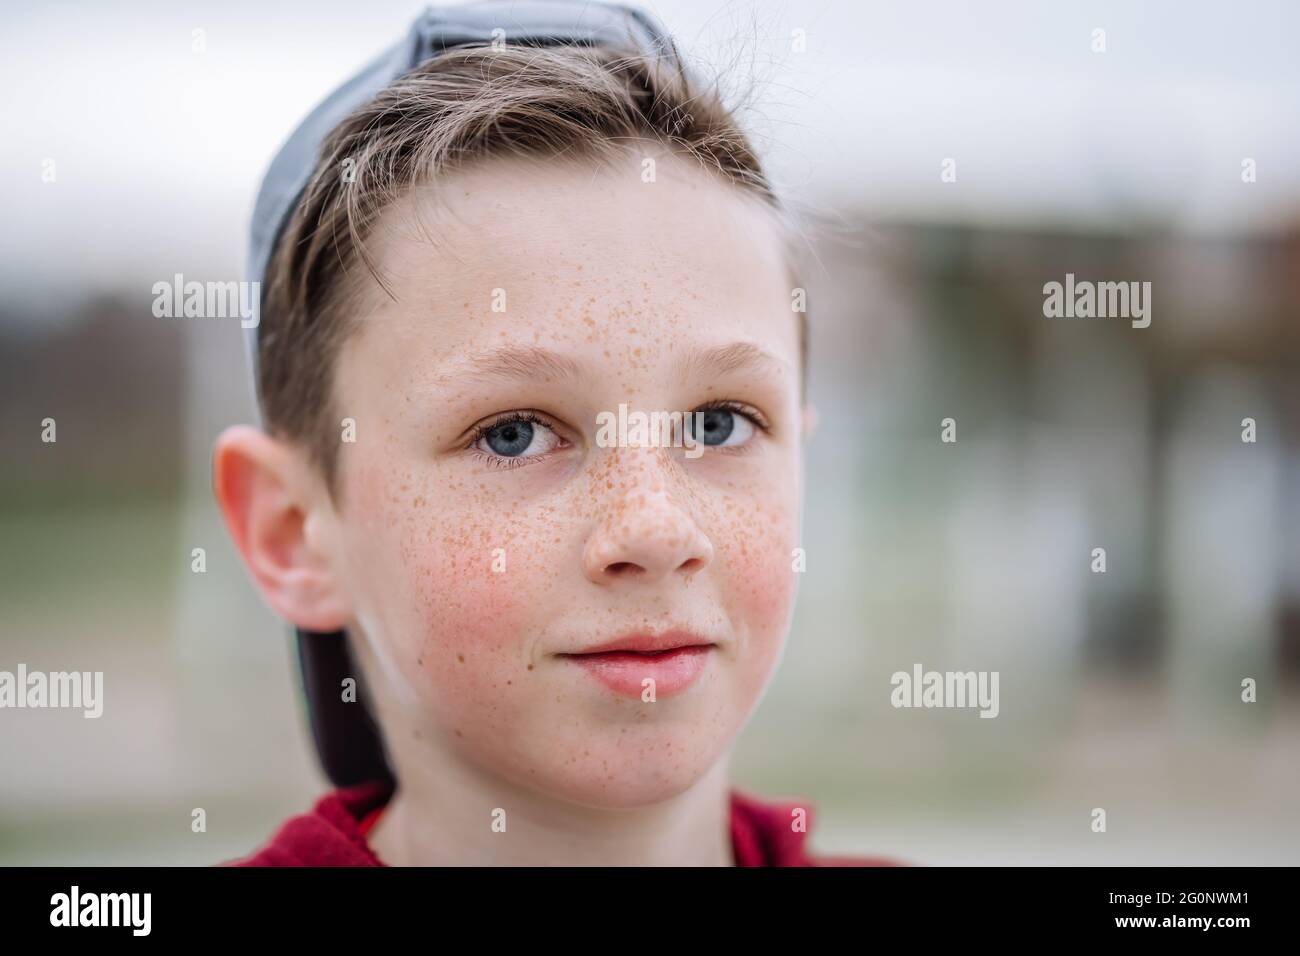 Close-up portrait of teenage smiling boy with freckles on his face, shallow depth of field Stock Photo